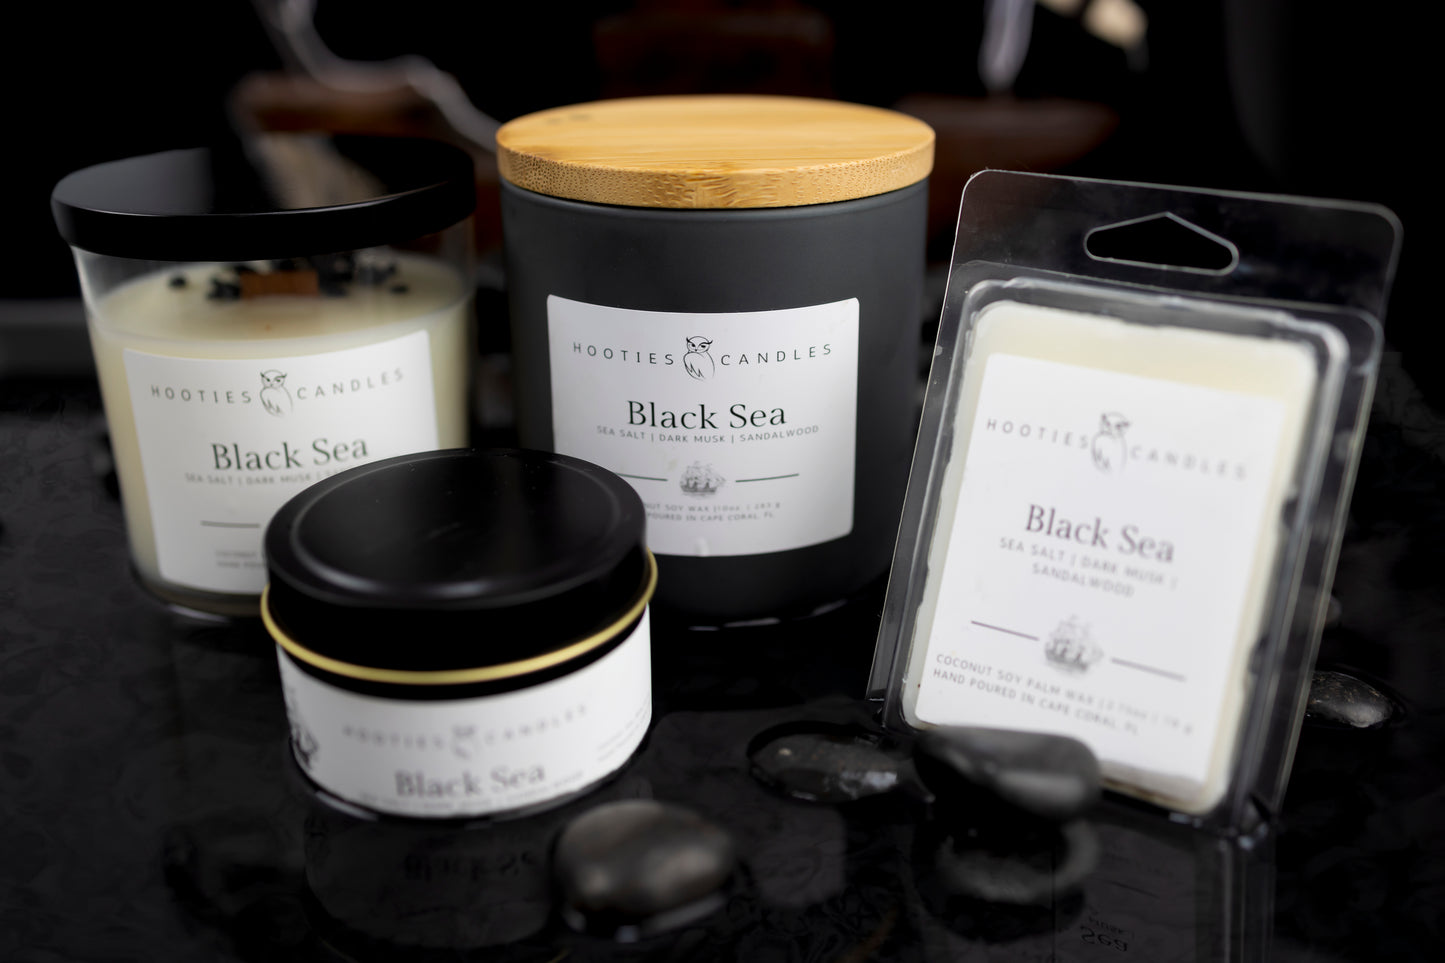 Black Sea Soy Candle | Soy Candles Near Me | Hooties Candles